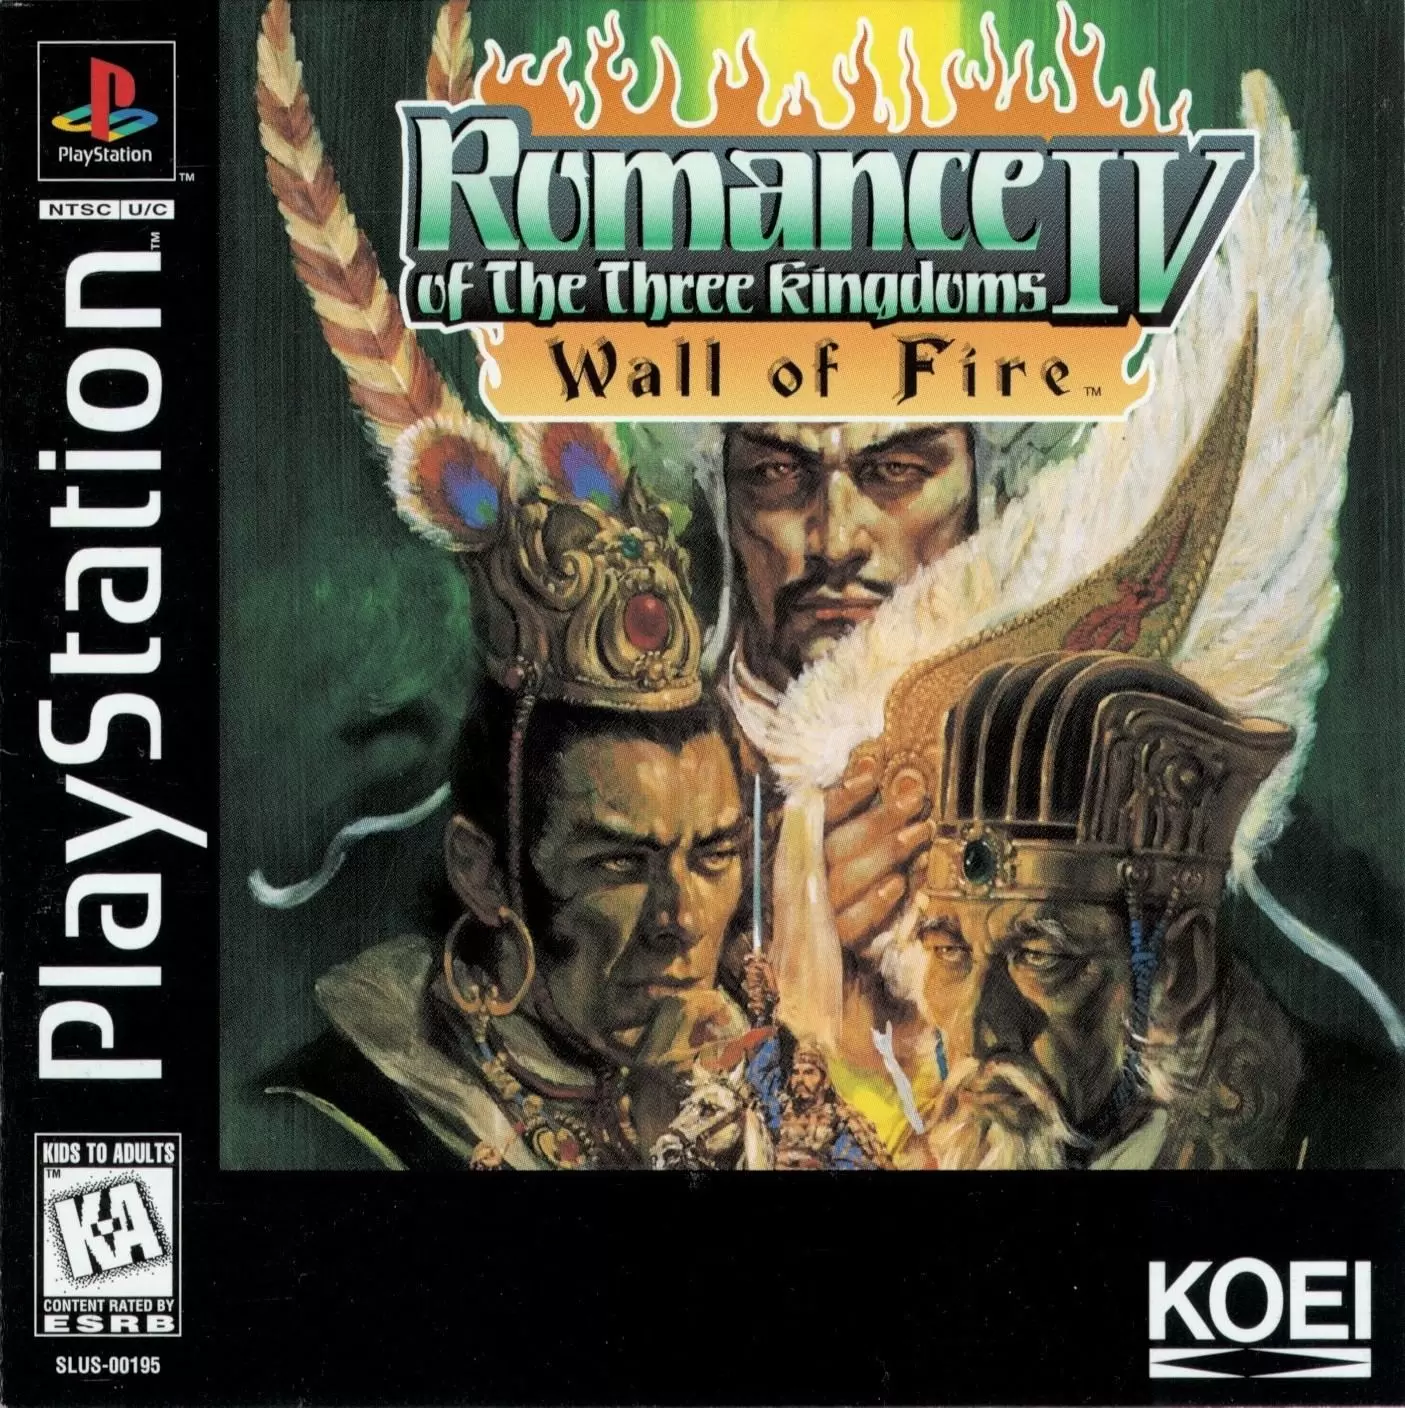 Playstation games - Romance of the Three Kingdoms IV: Wall of Fire